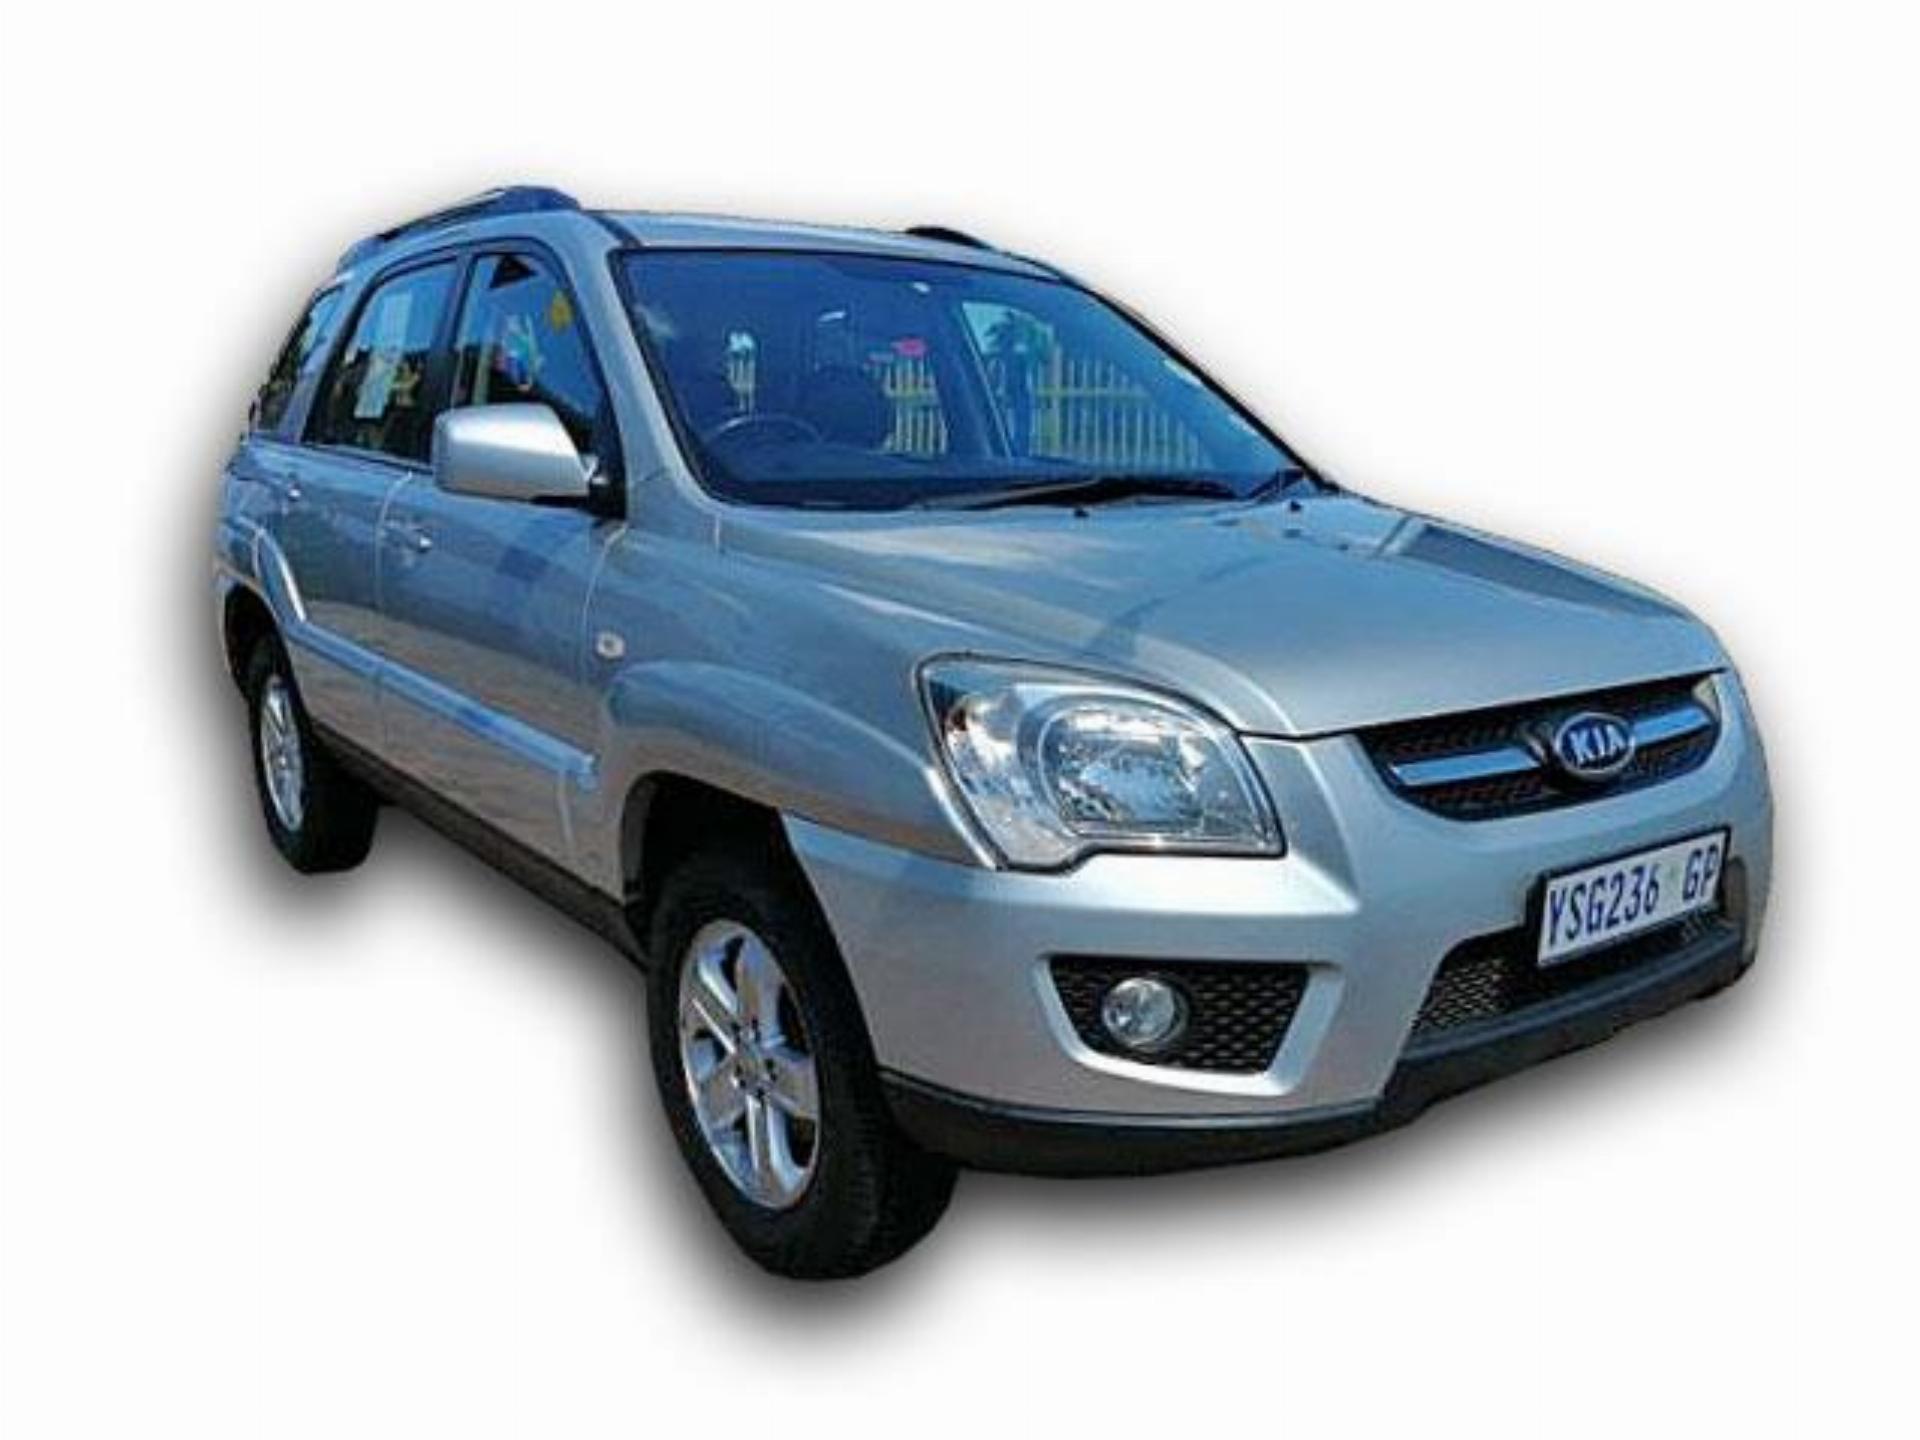 Used Kia Sportage 2.0 A/T 2009 on auction PV1025515